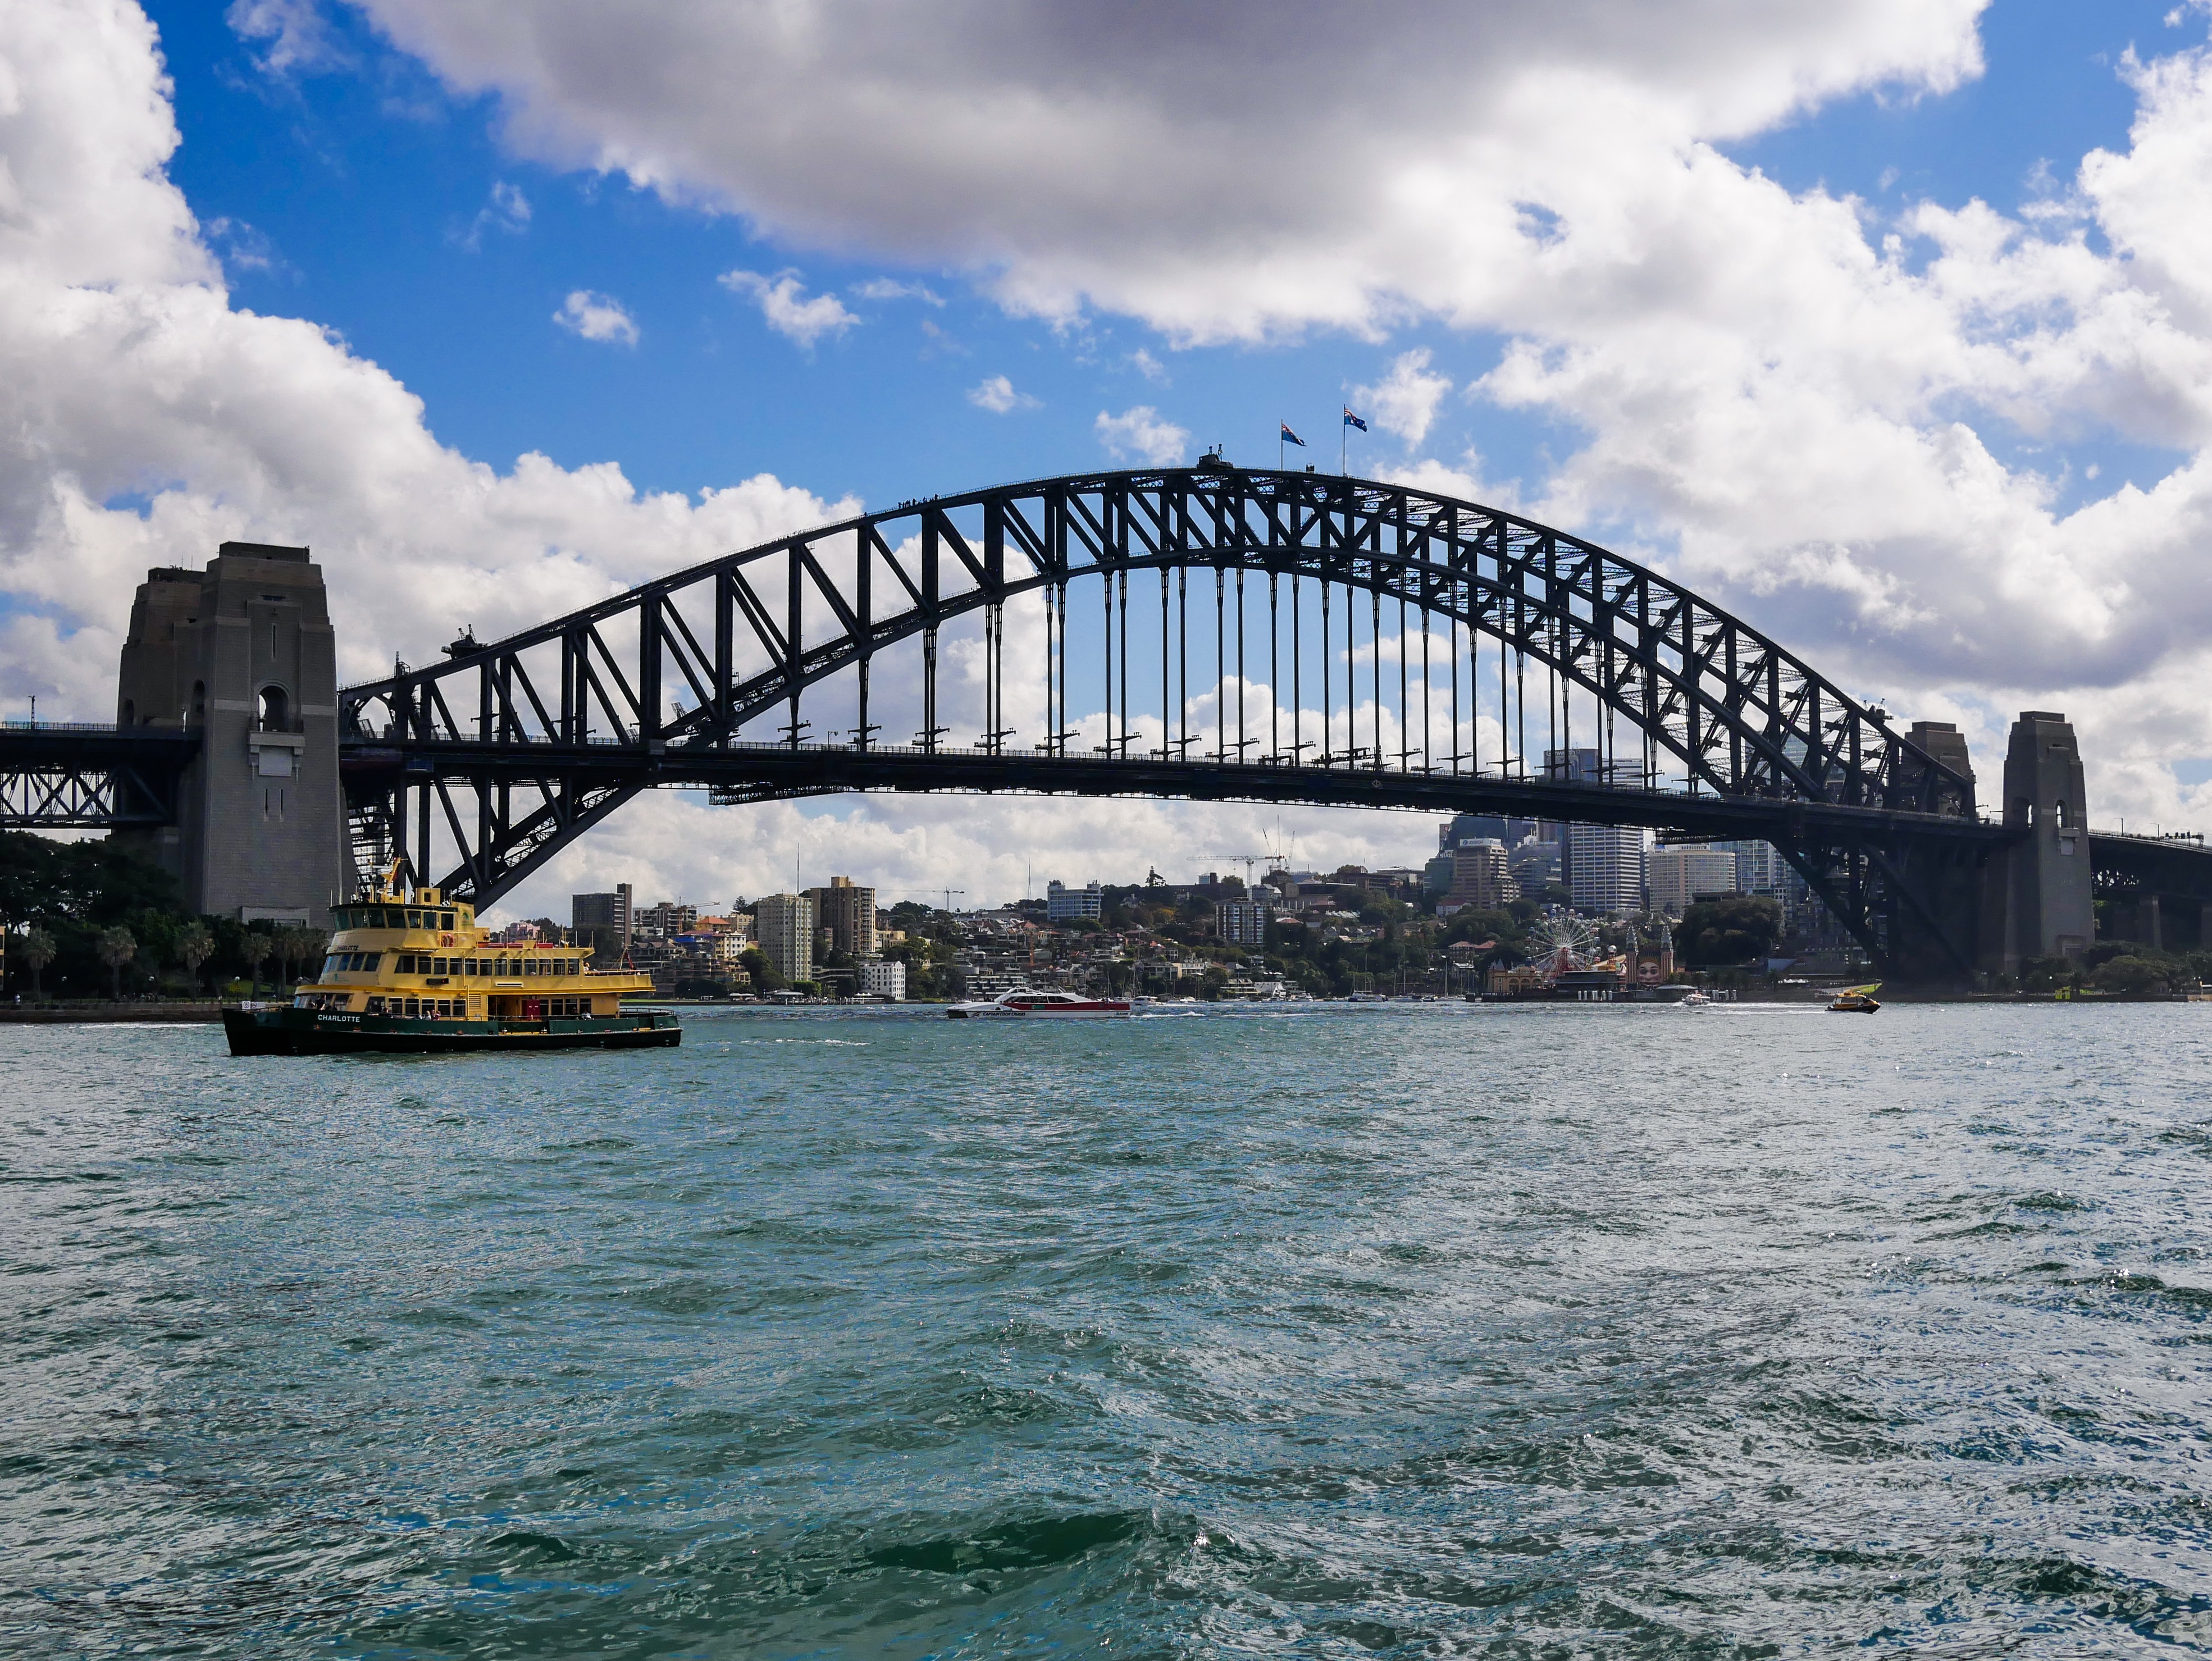 Tips for Visiting Sydney and Melbourne City